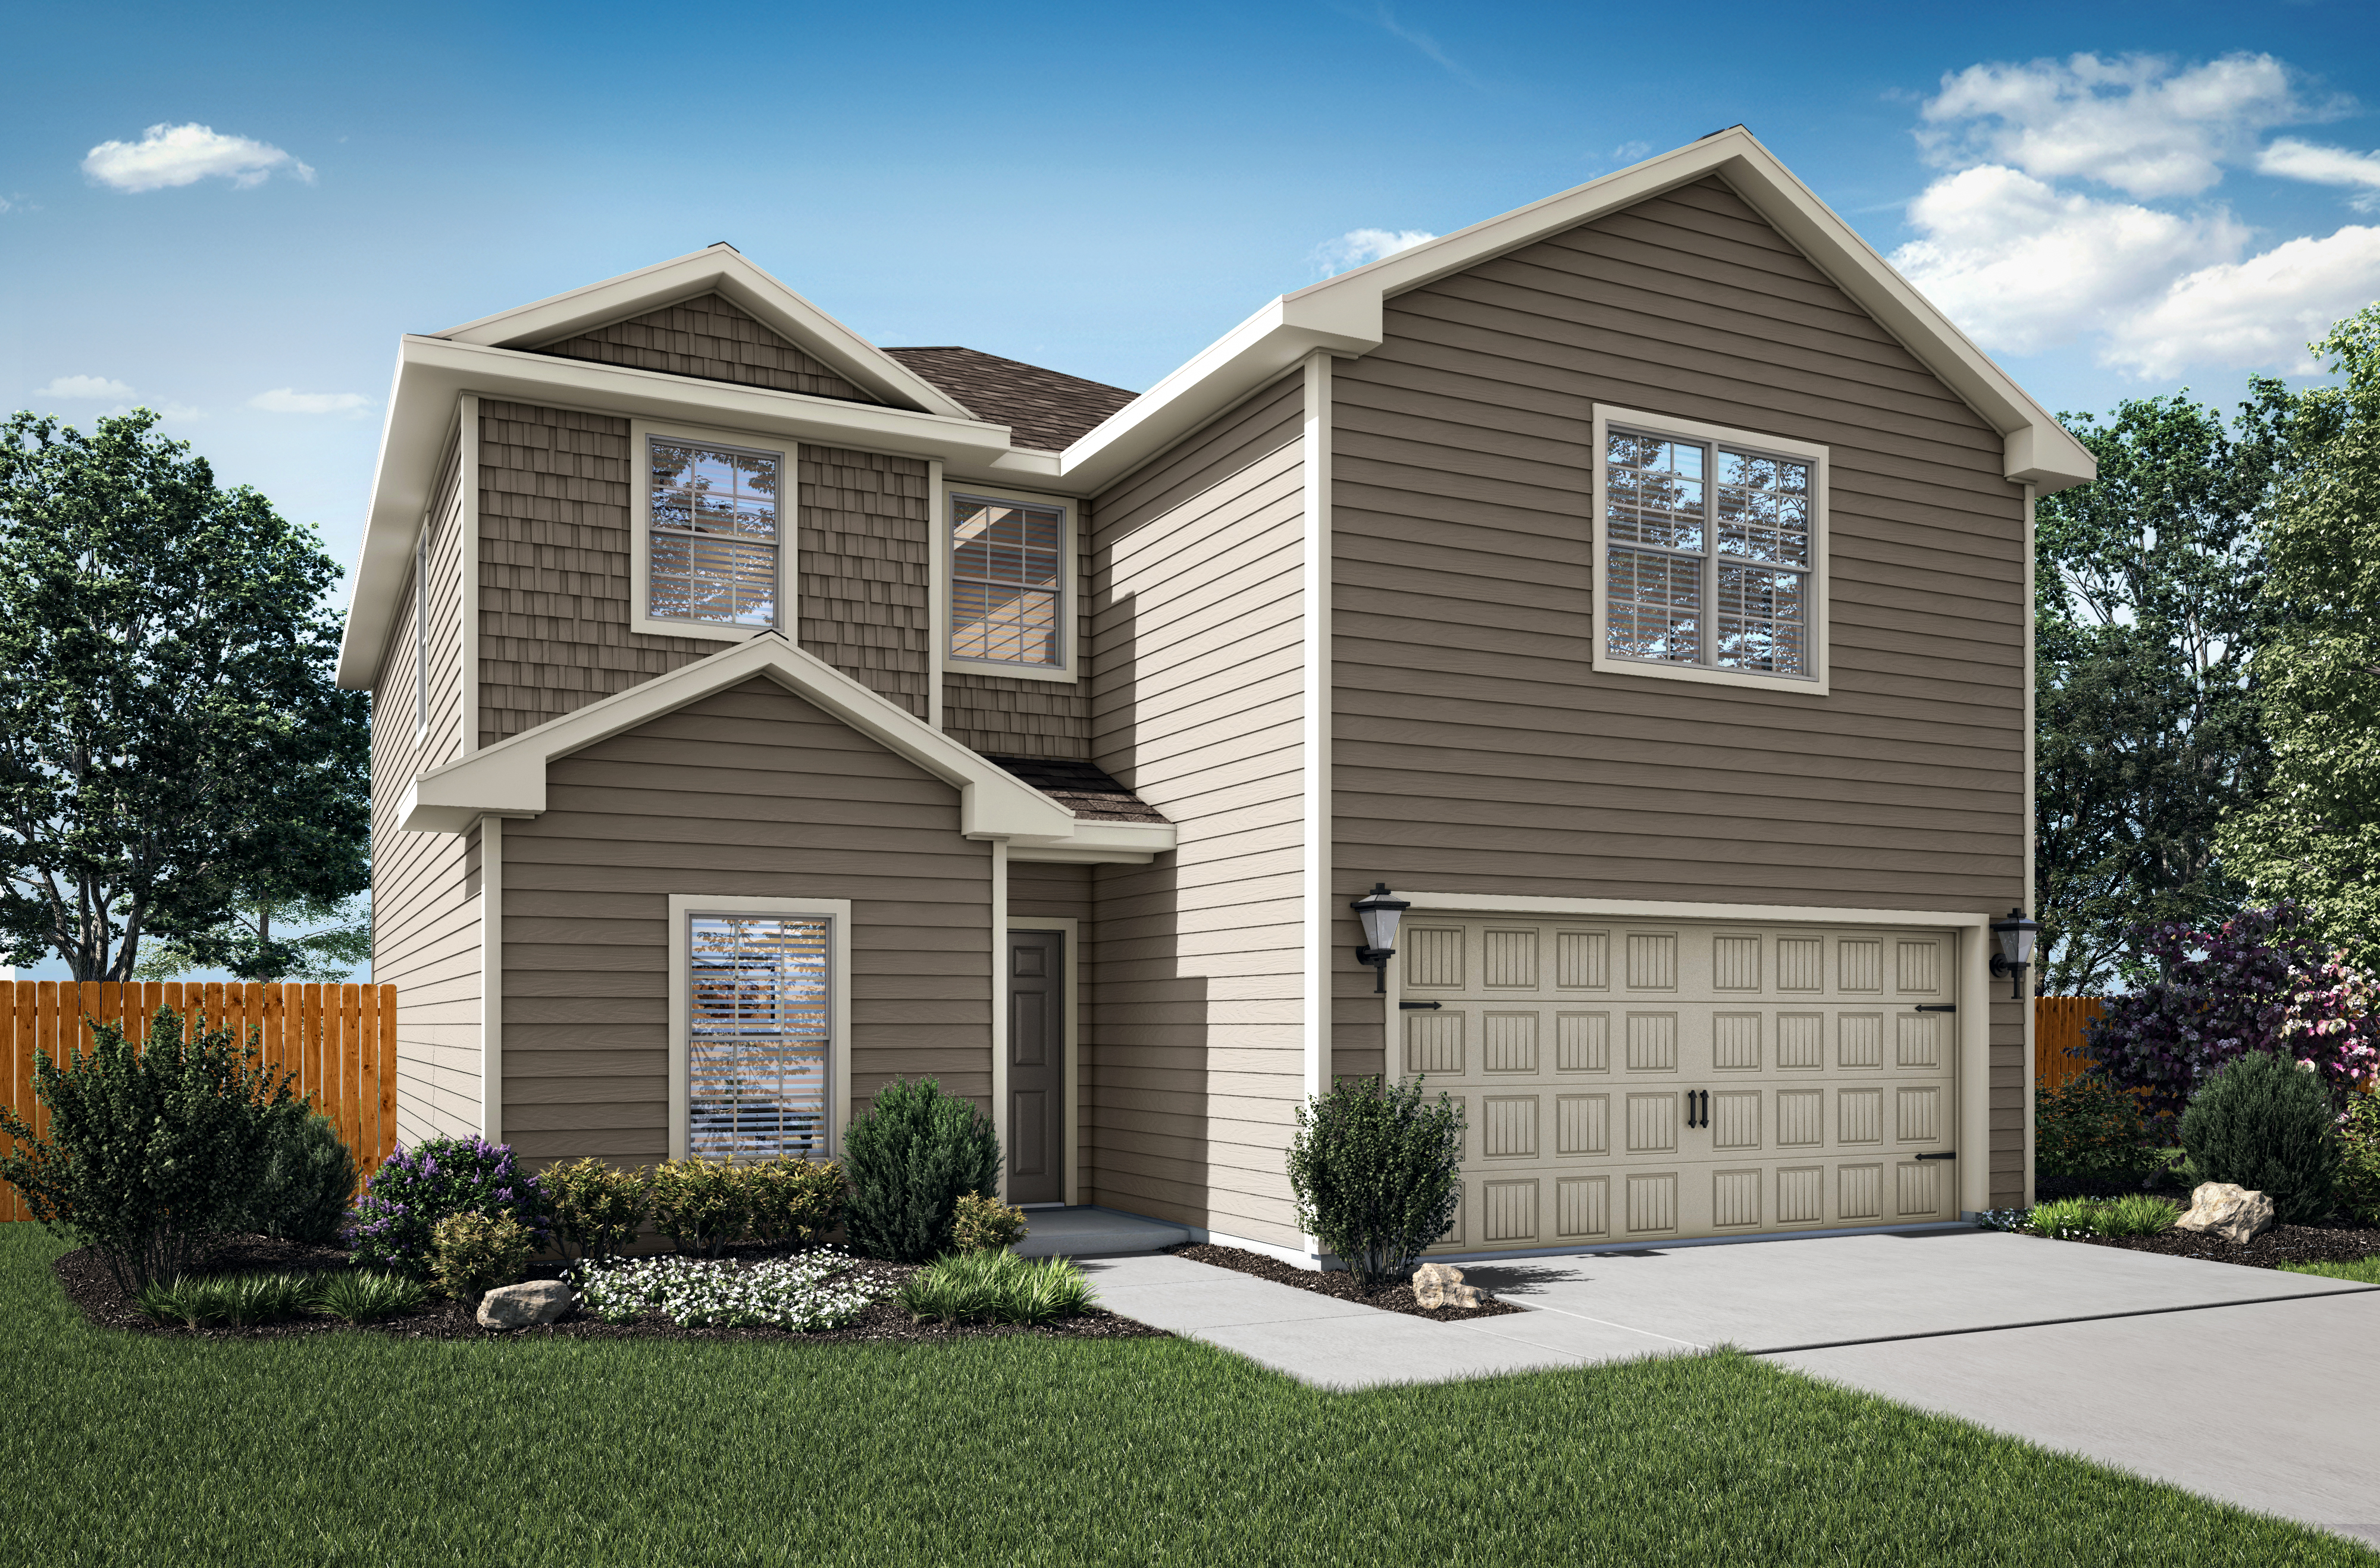 The Driftwood plan is a beautiful, two-story home by LGI Homes.